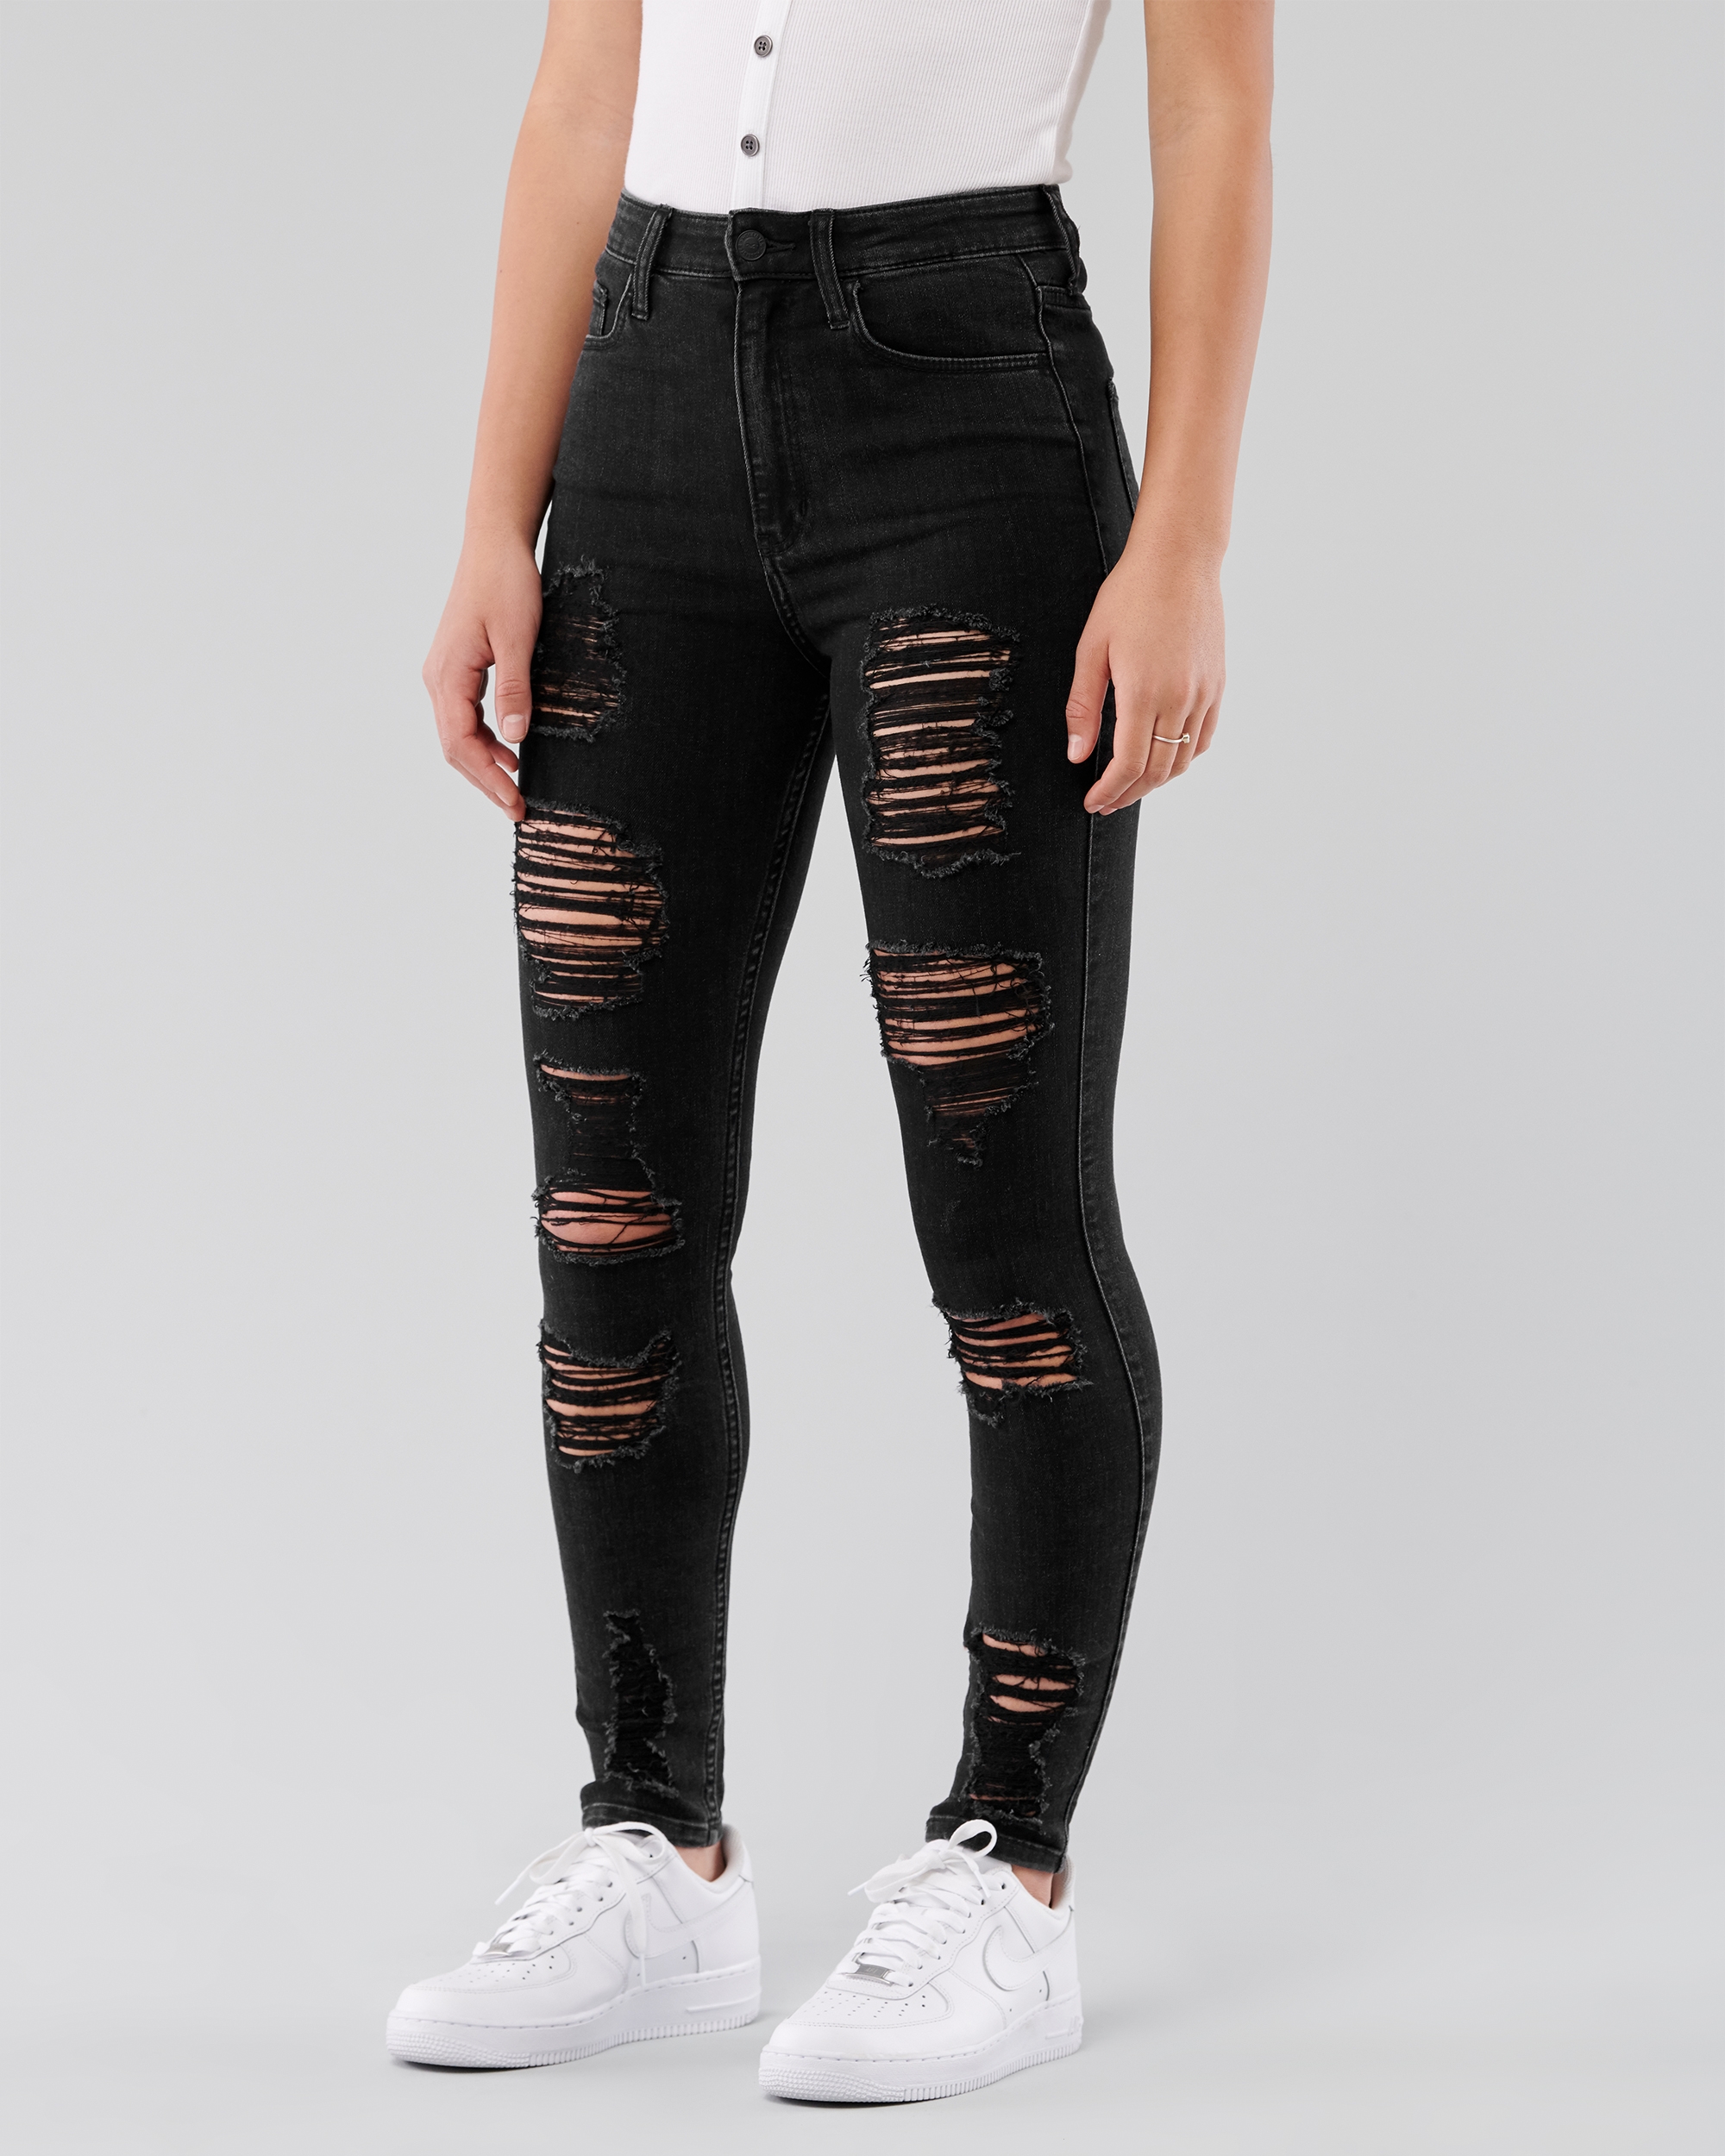 black ripped jeans from hollister